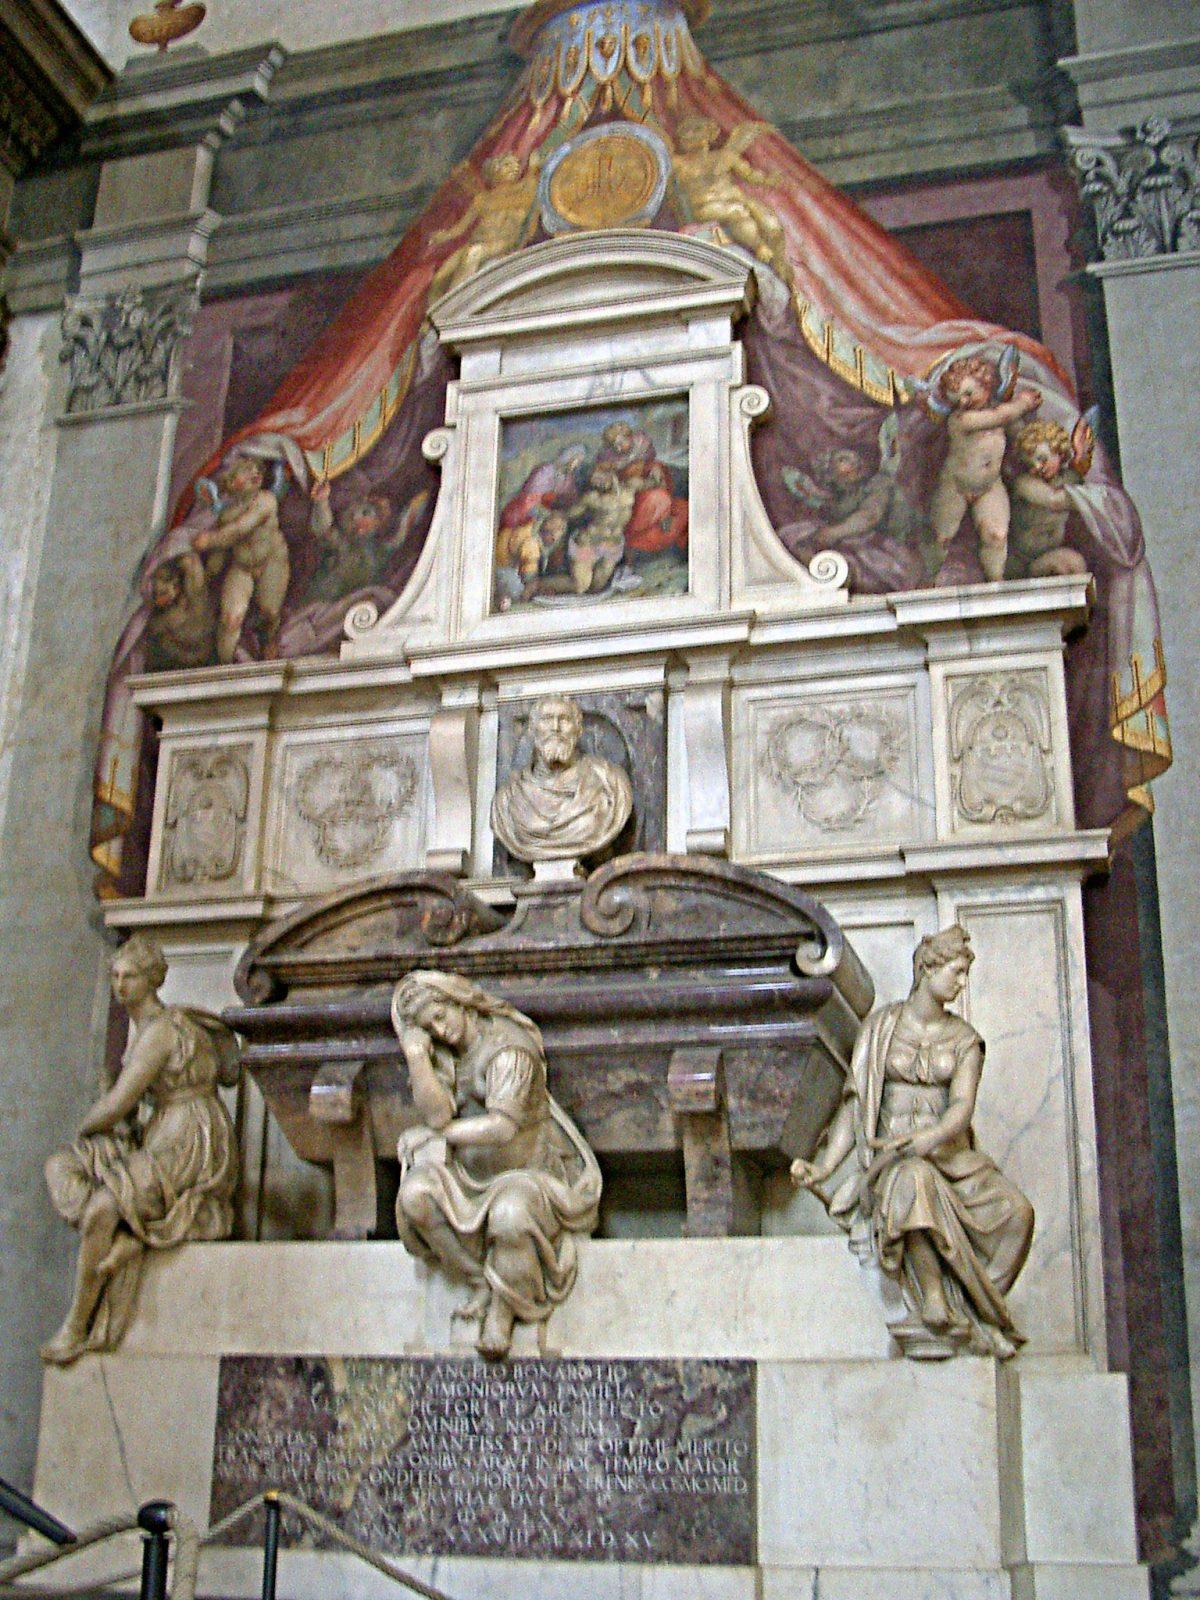 Michelangelo’s tomb in the Basilica of Santa Croce, in Florence, Italy. (Rico Heil)